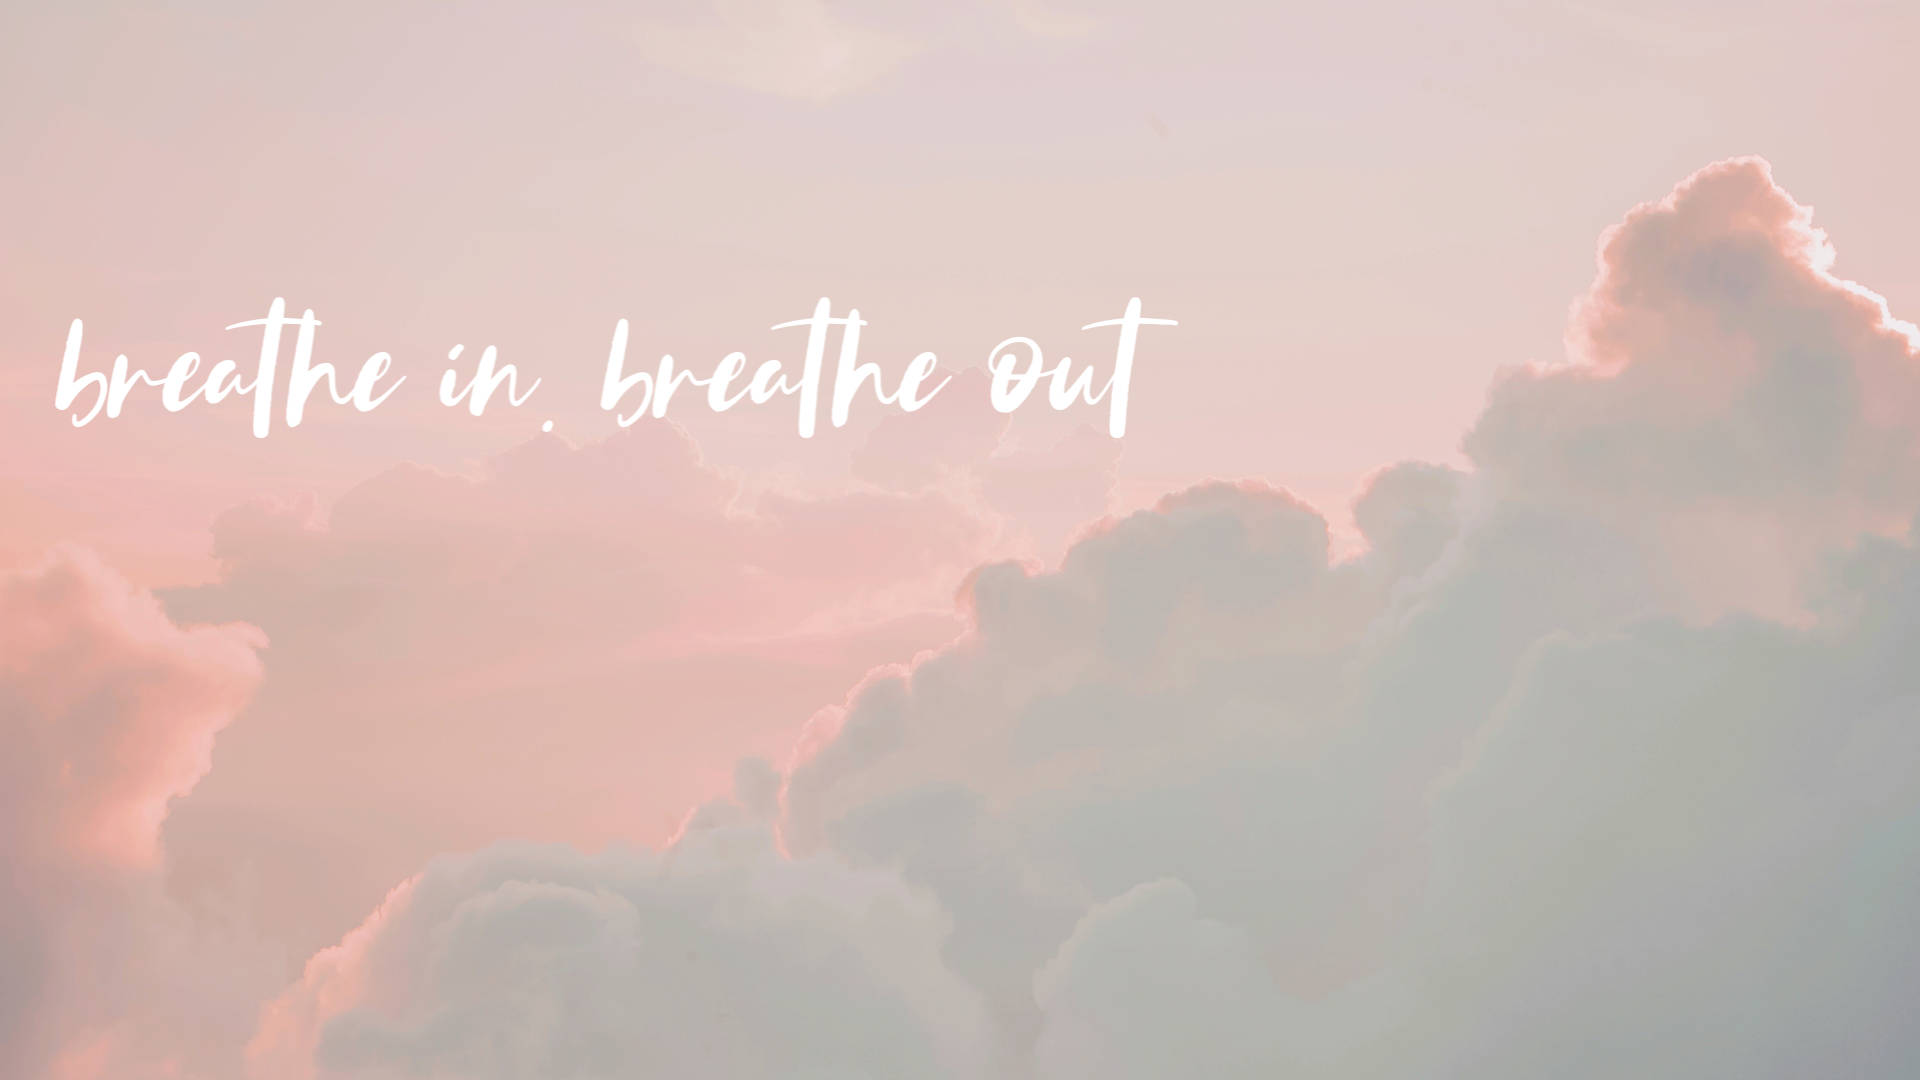 Breathe In Breathe Out Pastel Aesthetic Tumblr Laptop Background